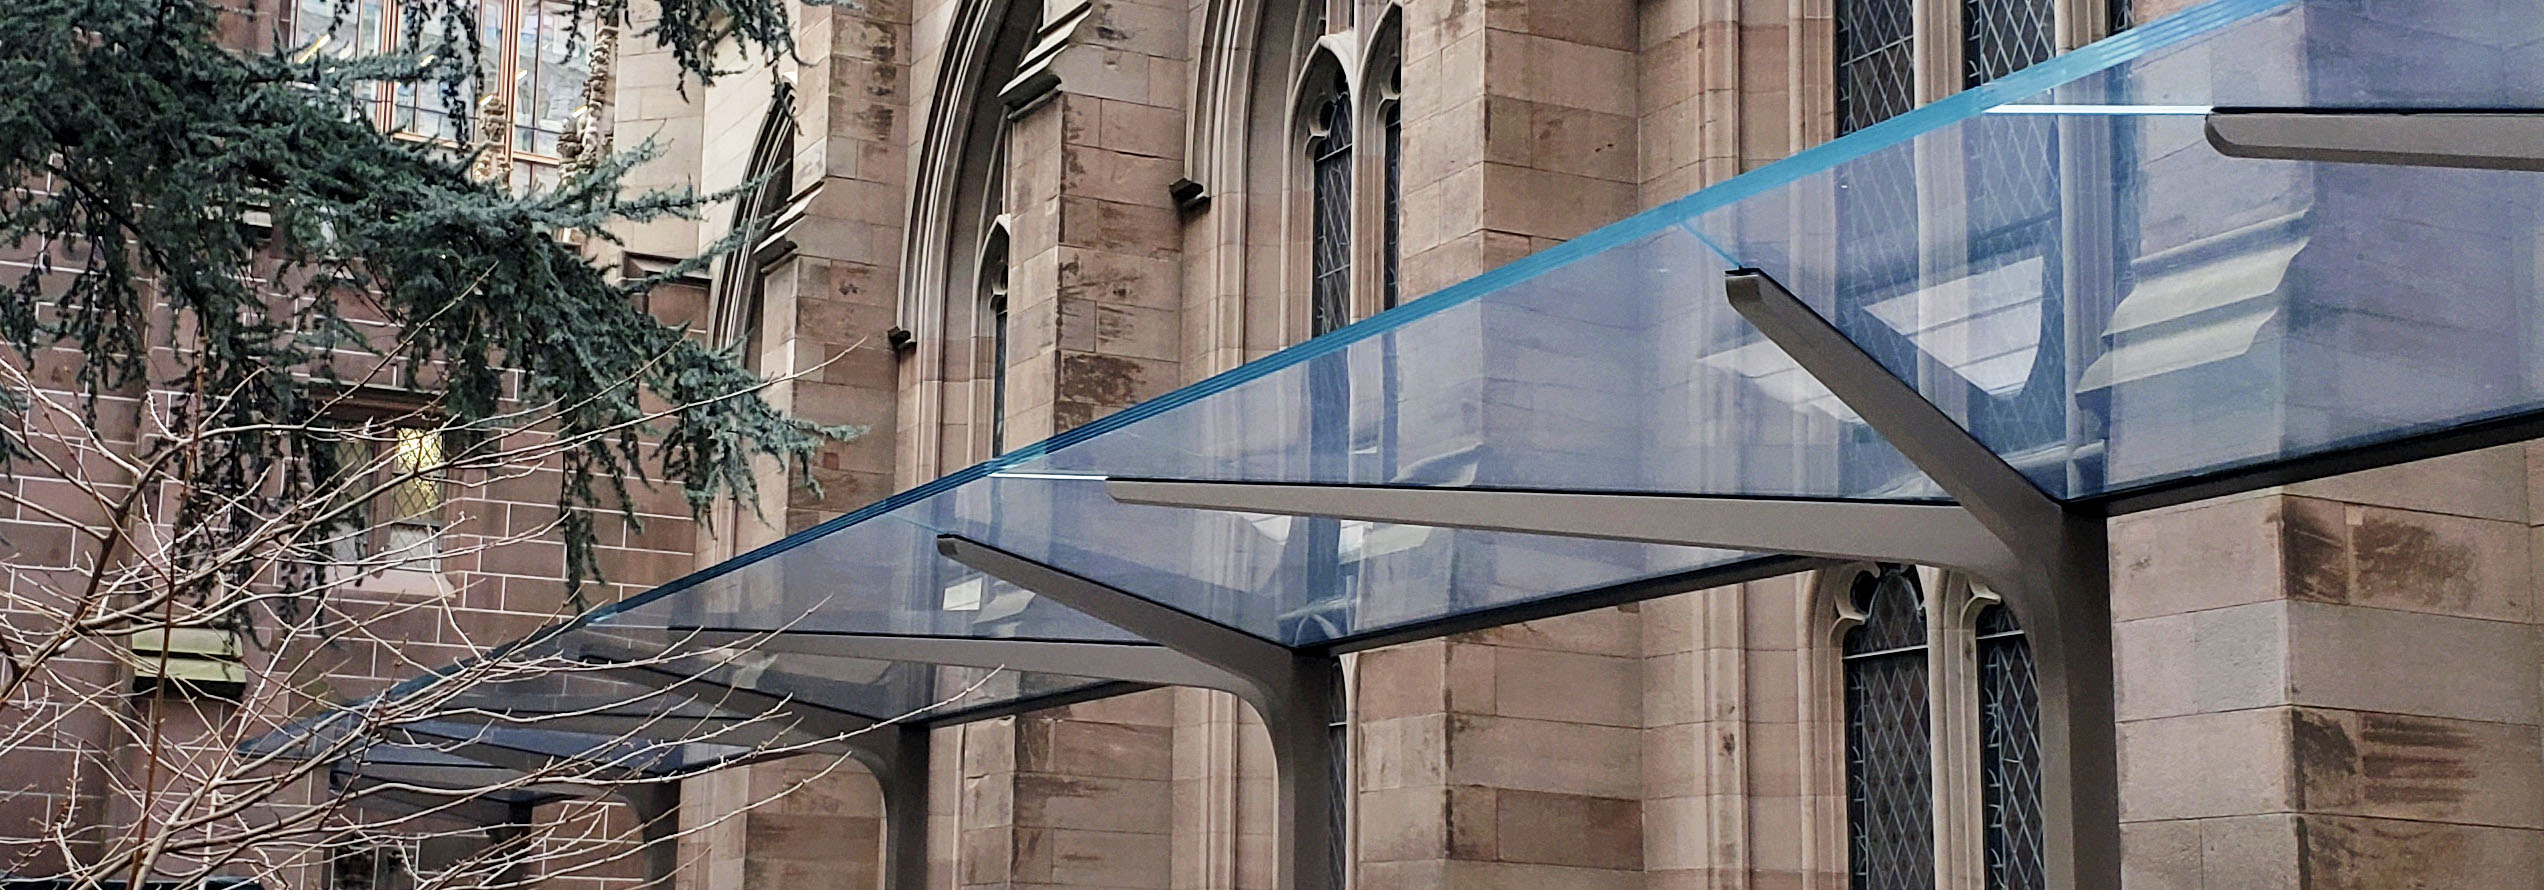 27m long glas canopy by seele for the Trinity Church in New York.